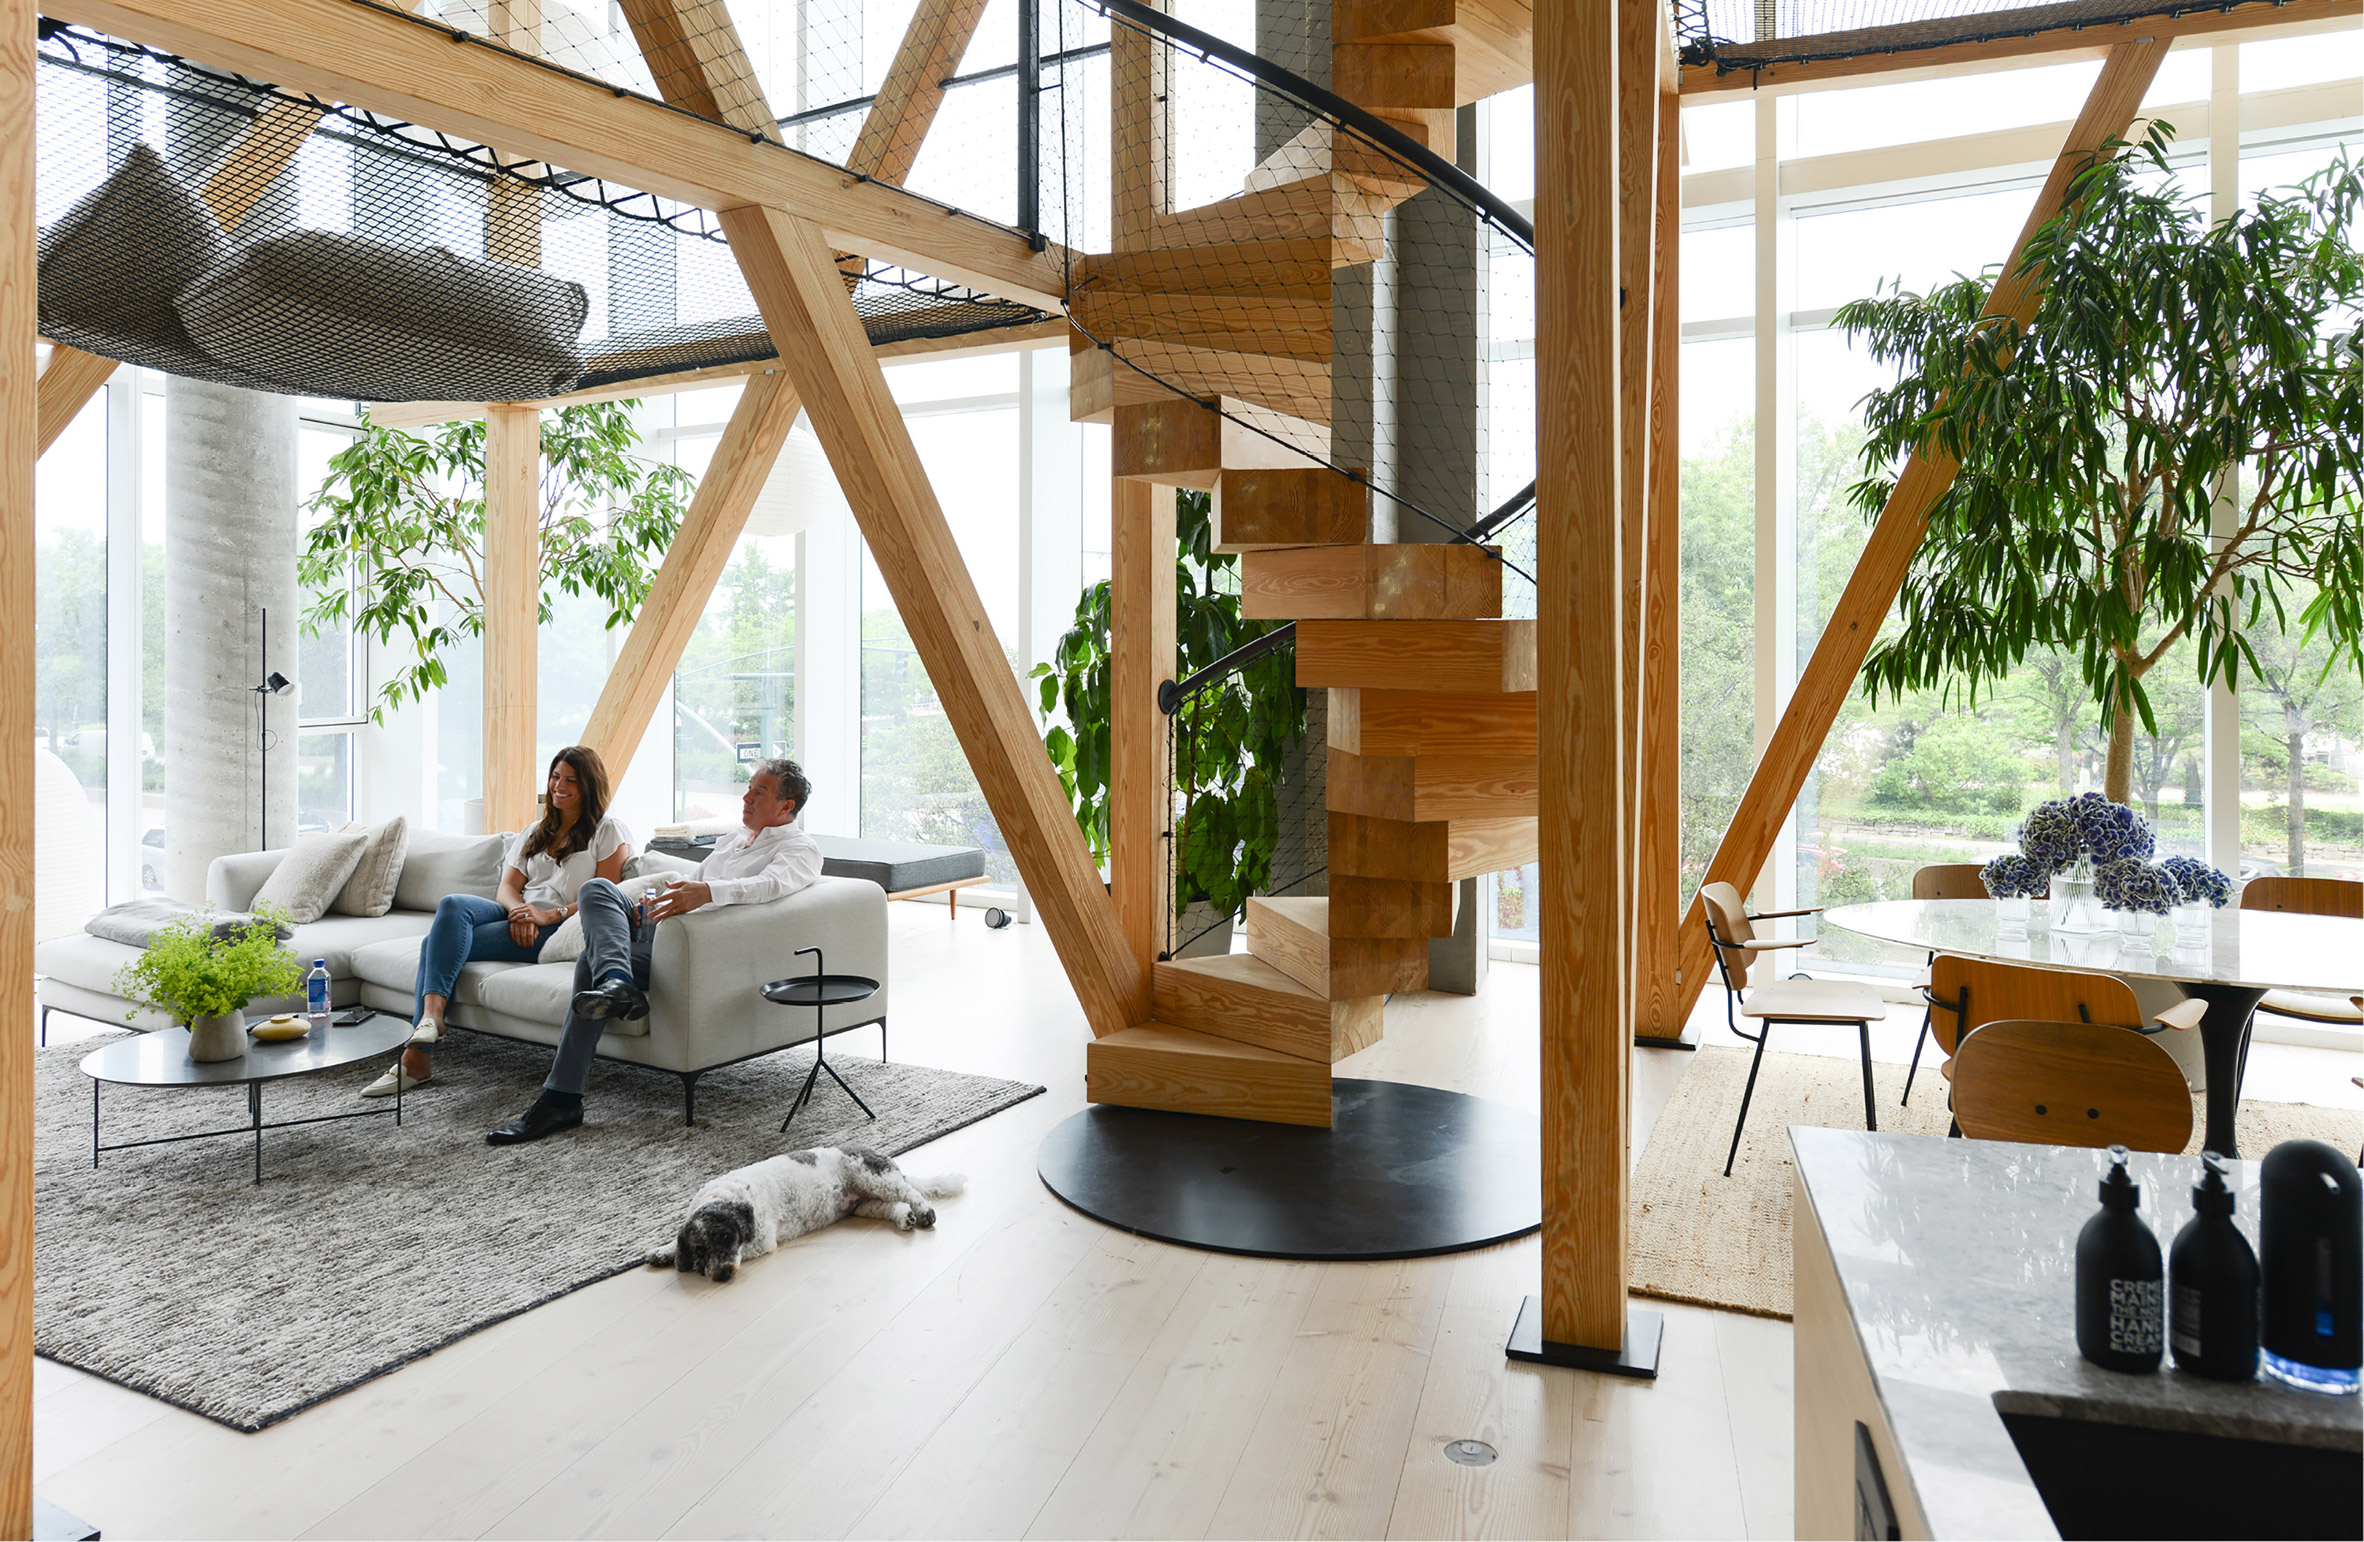 Double-height living space featuring timber structures